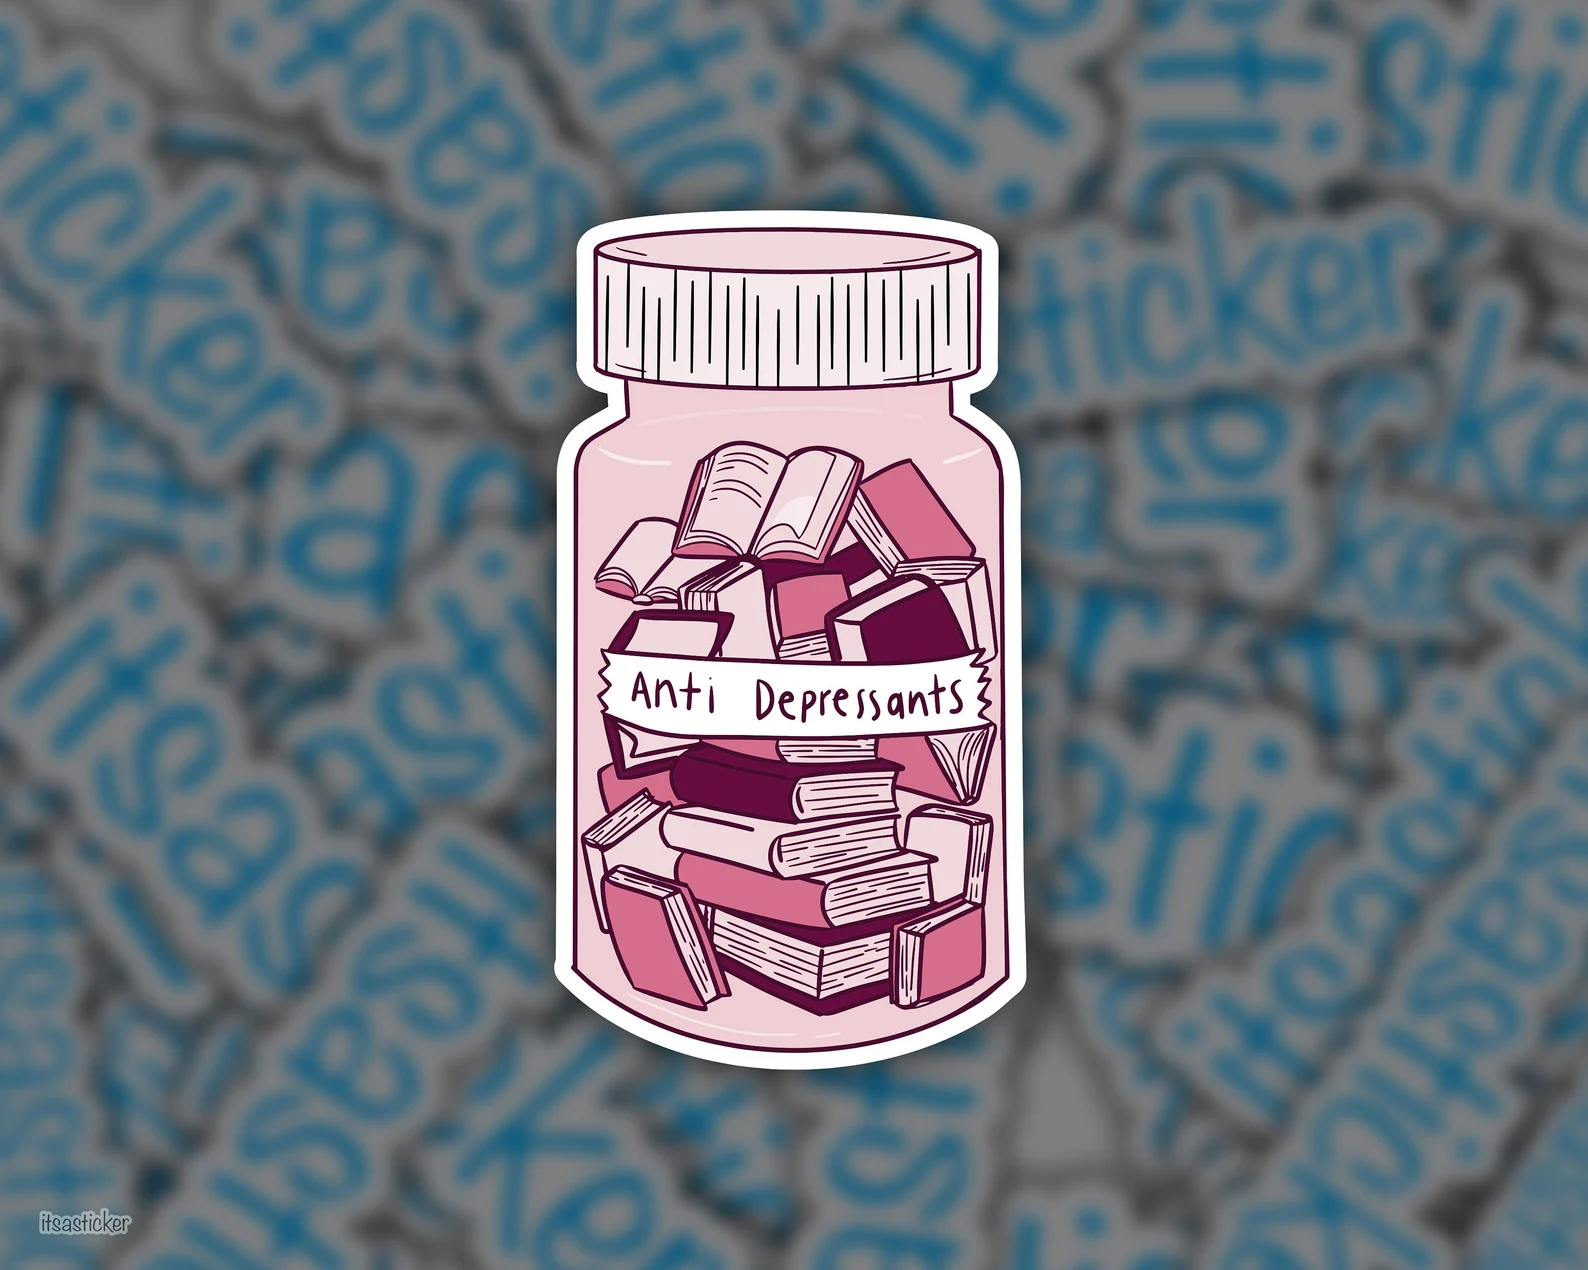 A pink vinyl sticker in the shape of a pill bottle labeled "antidepressants" full of books.